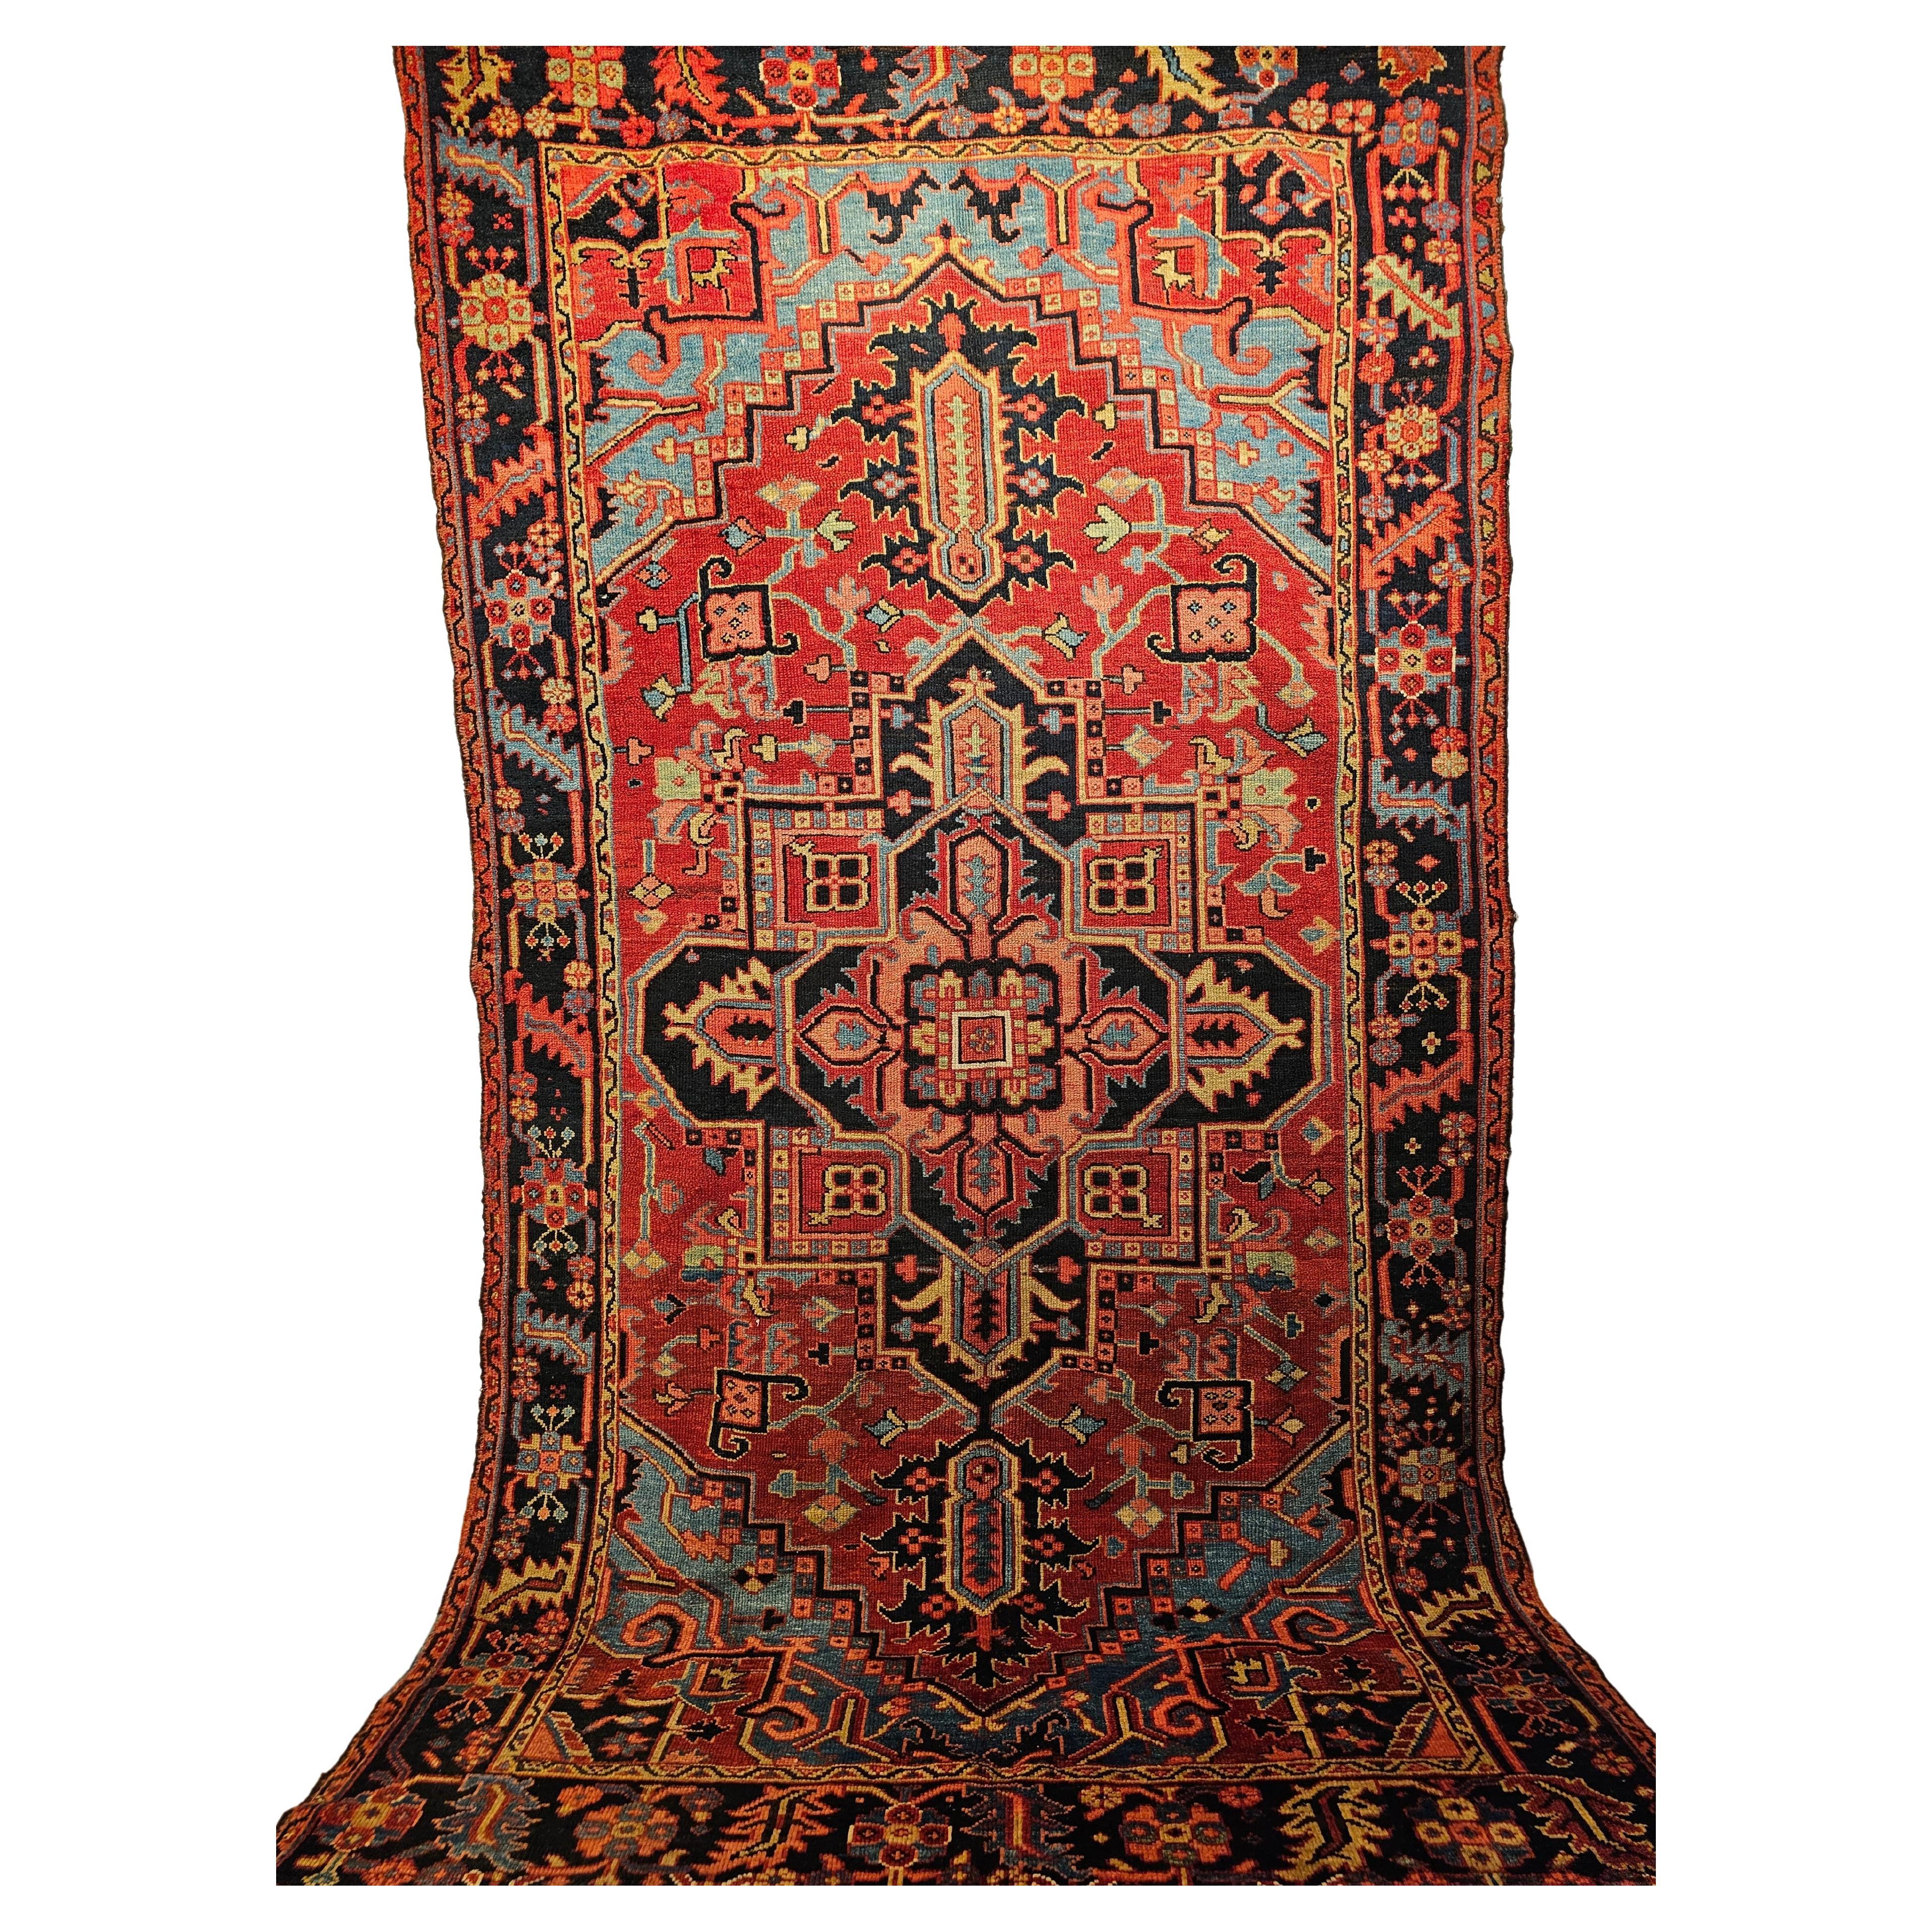 Beautiful example of the Persian village rug weaving is represented in this rare 